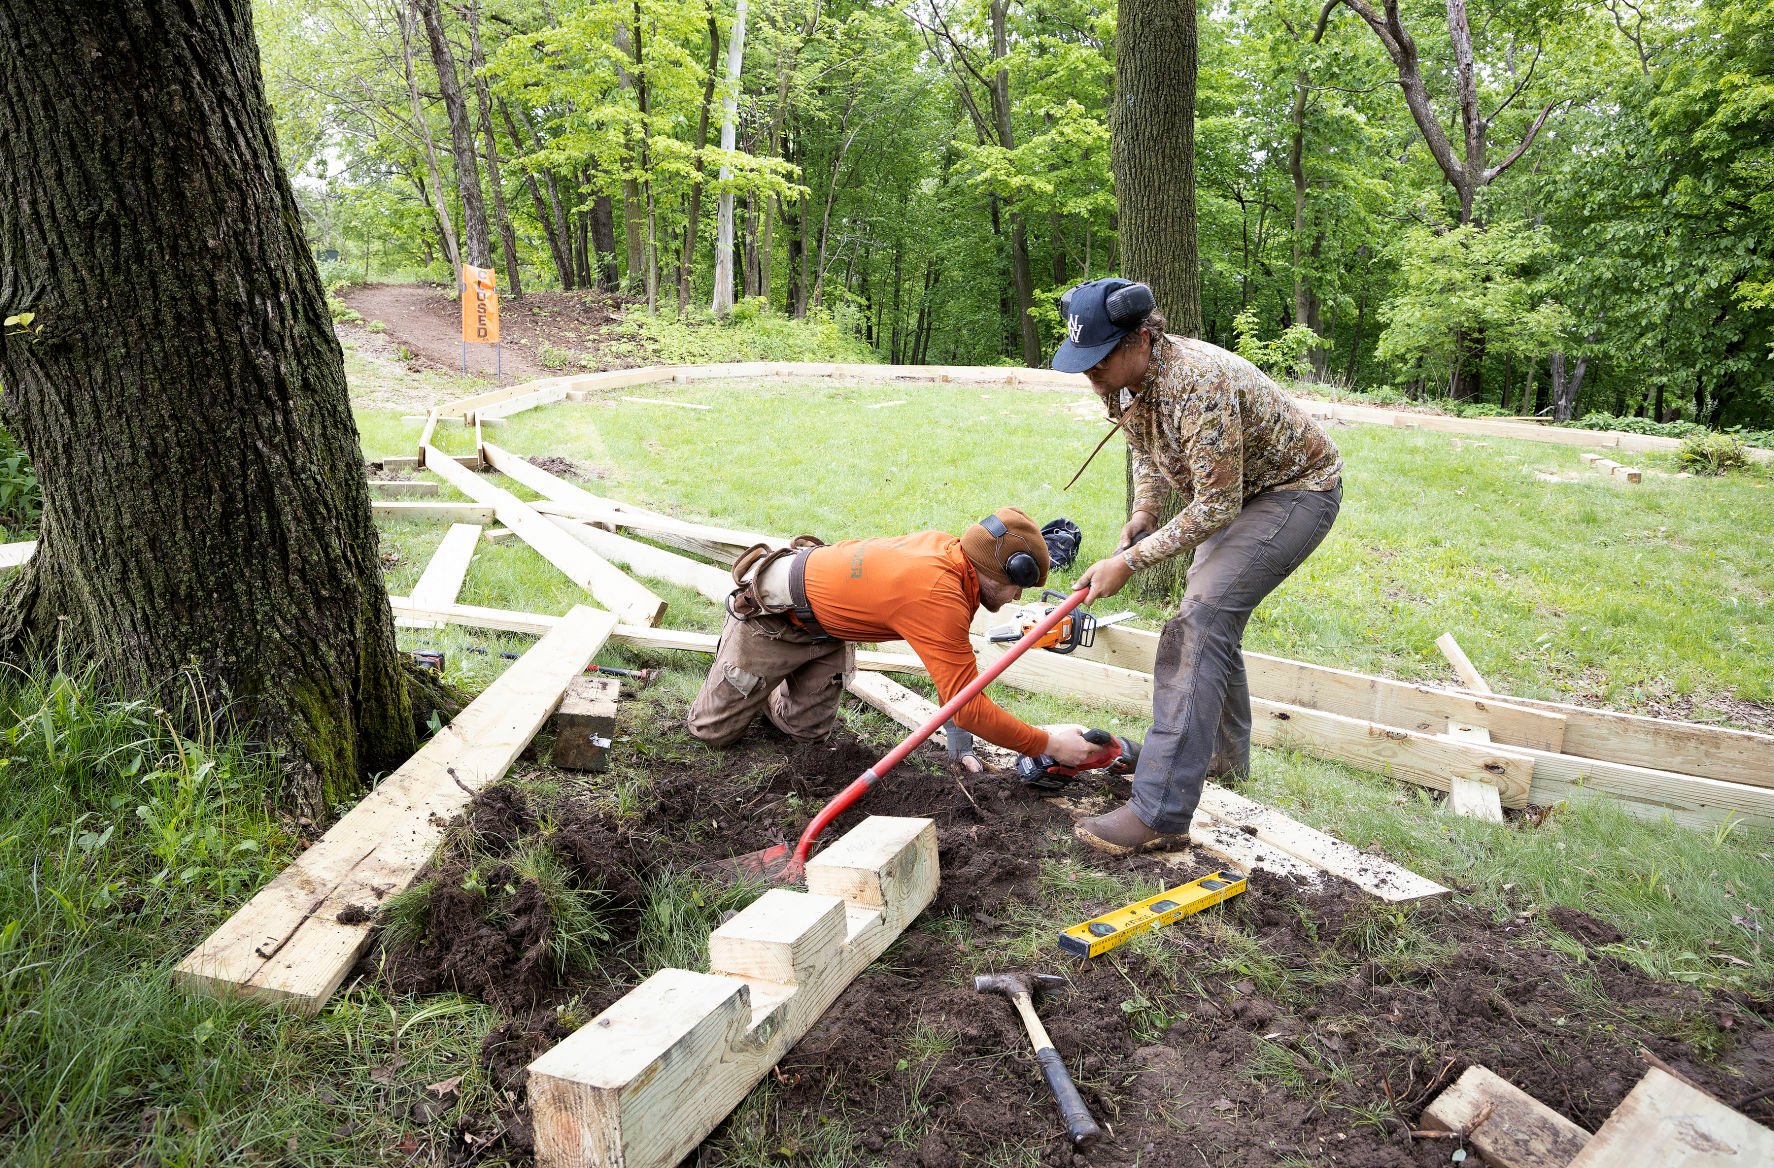 Tanner Williams (left) and Nate Speer, of Pathfinder Trail Building, of Eagan, Minn., work on a new mountain bike trail at Chestnut Mountain Resort in Galena, Ill., on Friday. The bike trails could open in the late summer.    PHOTO CREDIT: Stephen Gassman